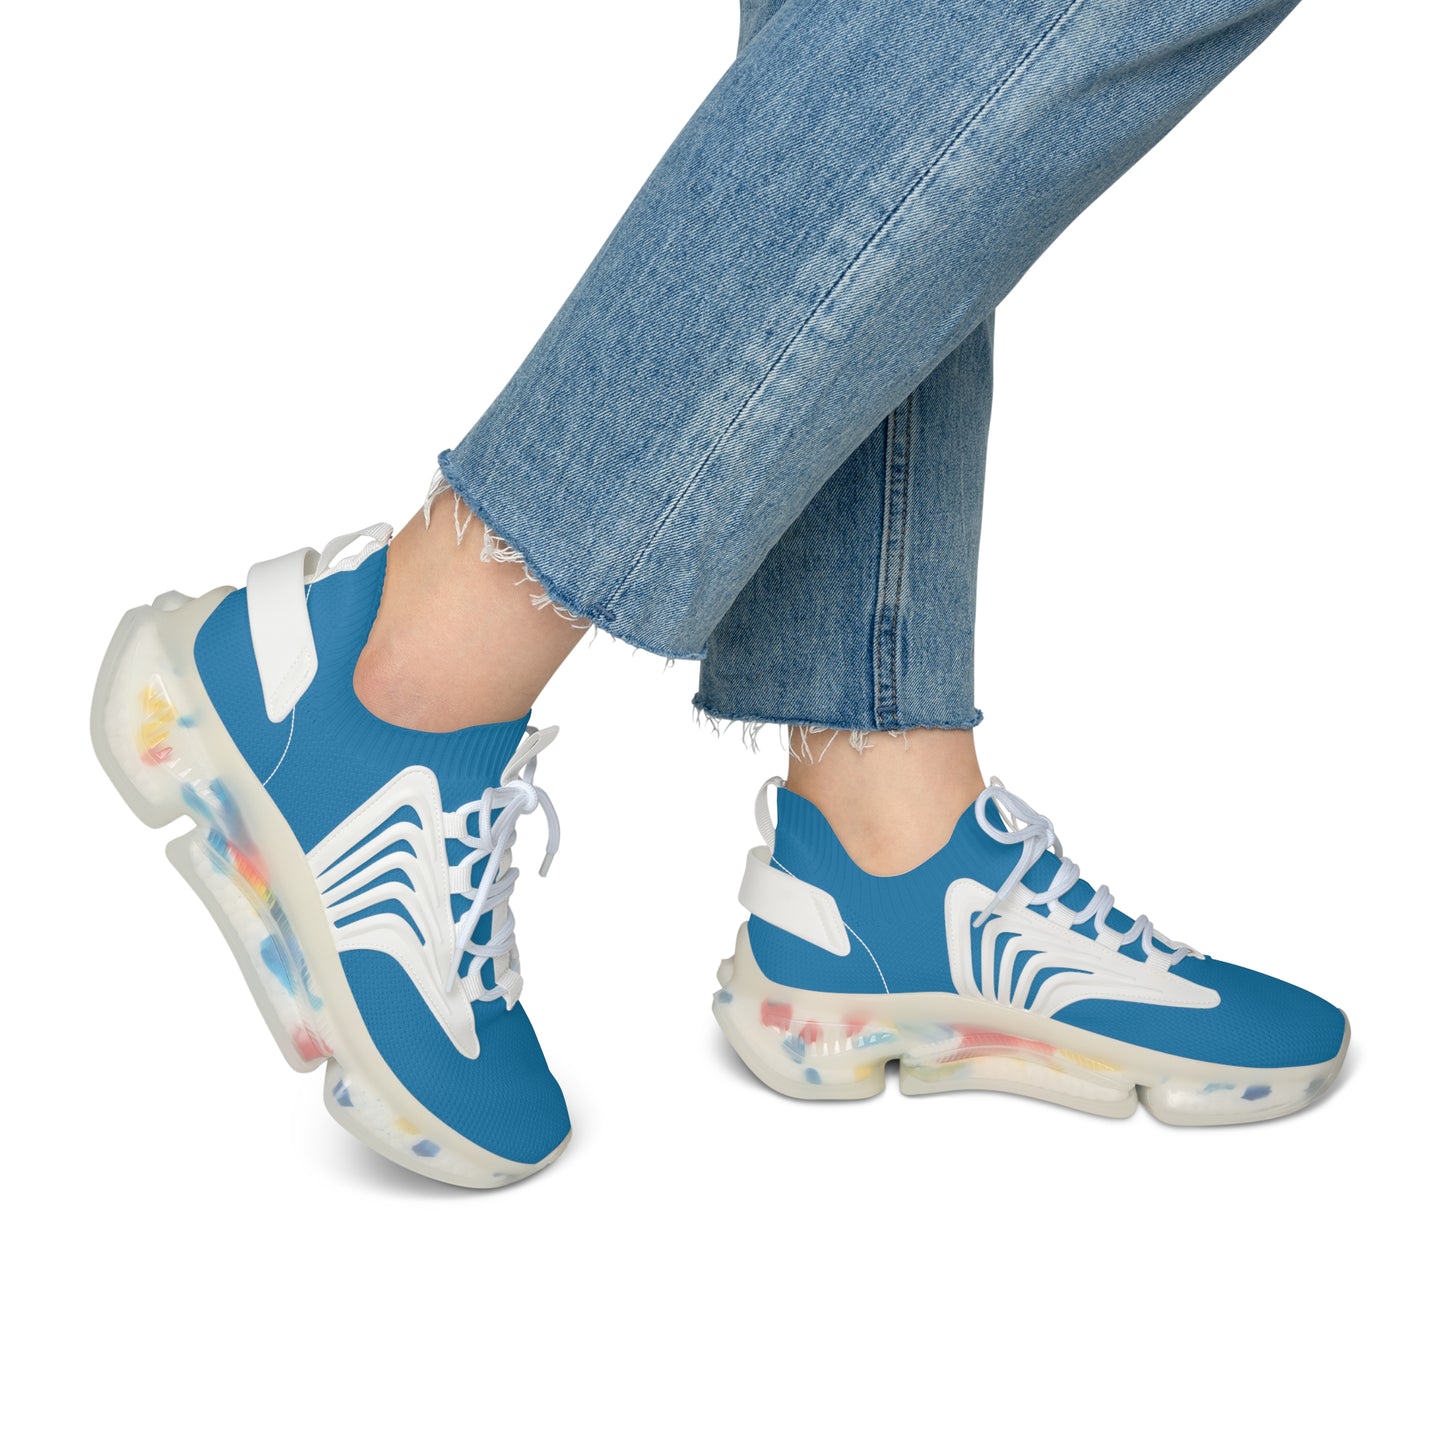 Solid Turquoise Women's Mesh Sneakers